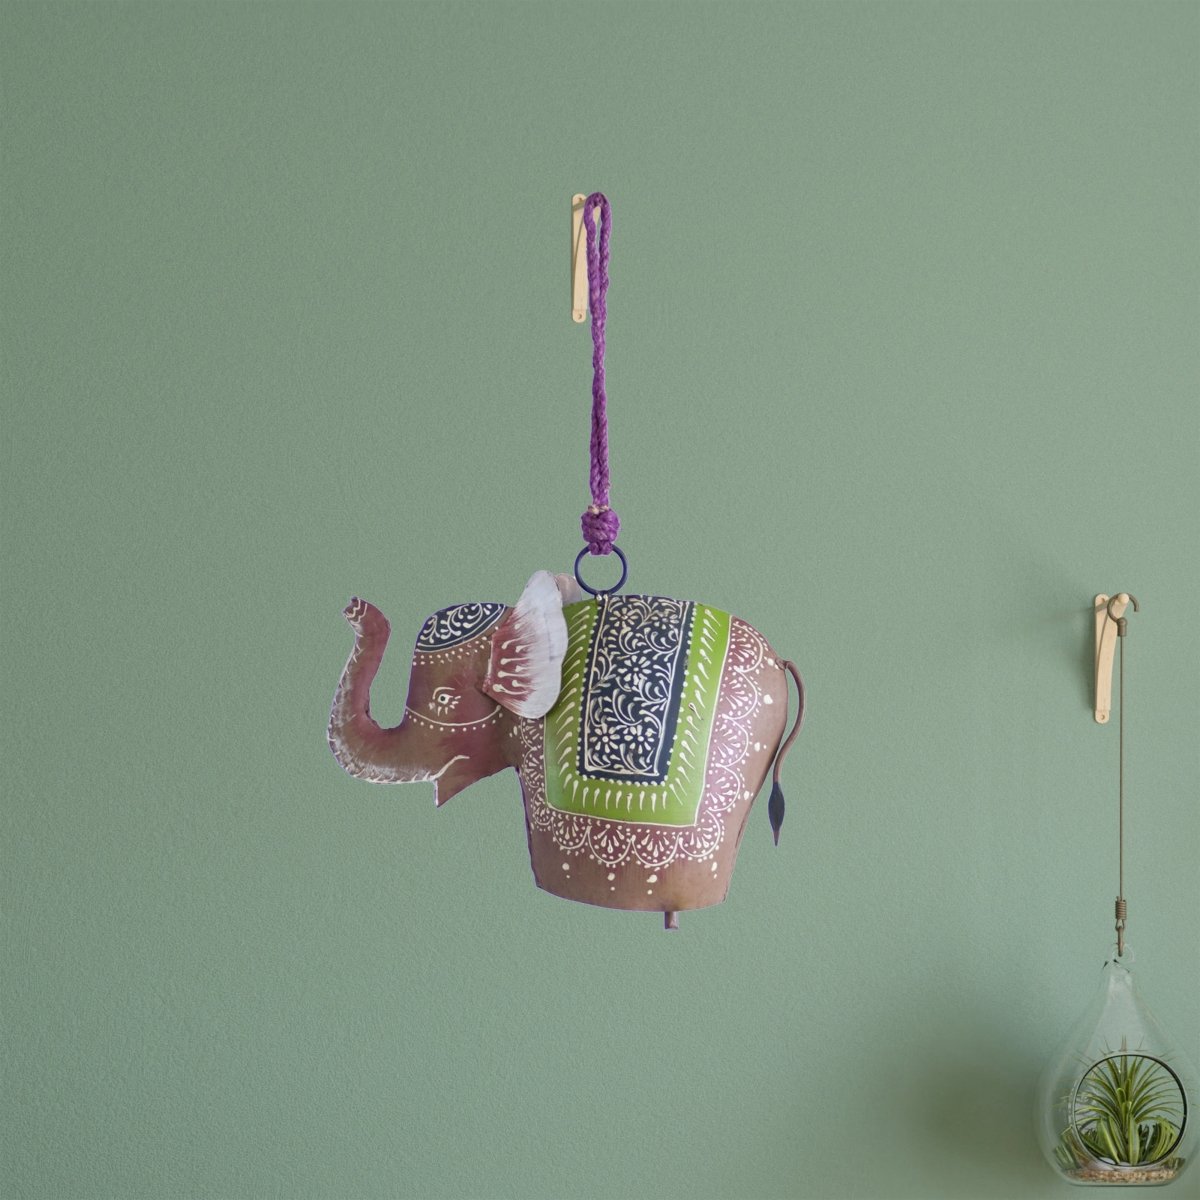 Kezevel Handmade Metal Elephant Hanging Bell - Antique Multicolour Wind Chimes with Rope for Home Garden Decor, Balcony Decor